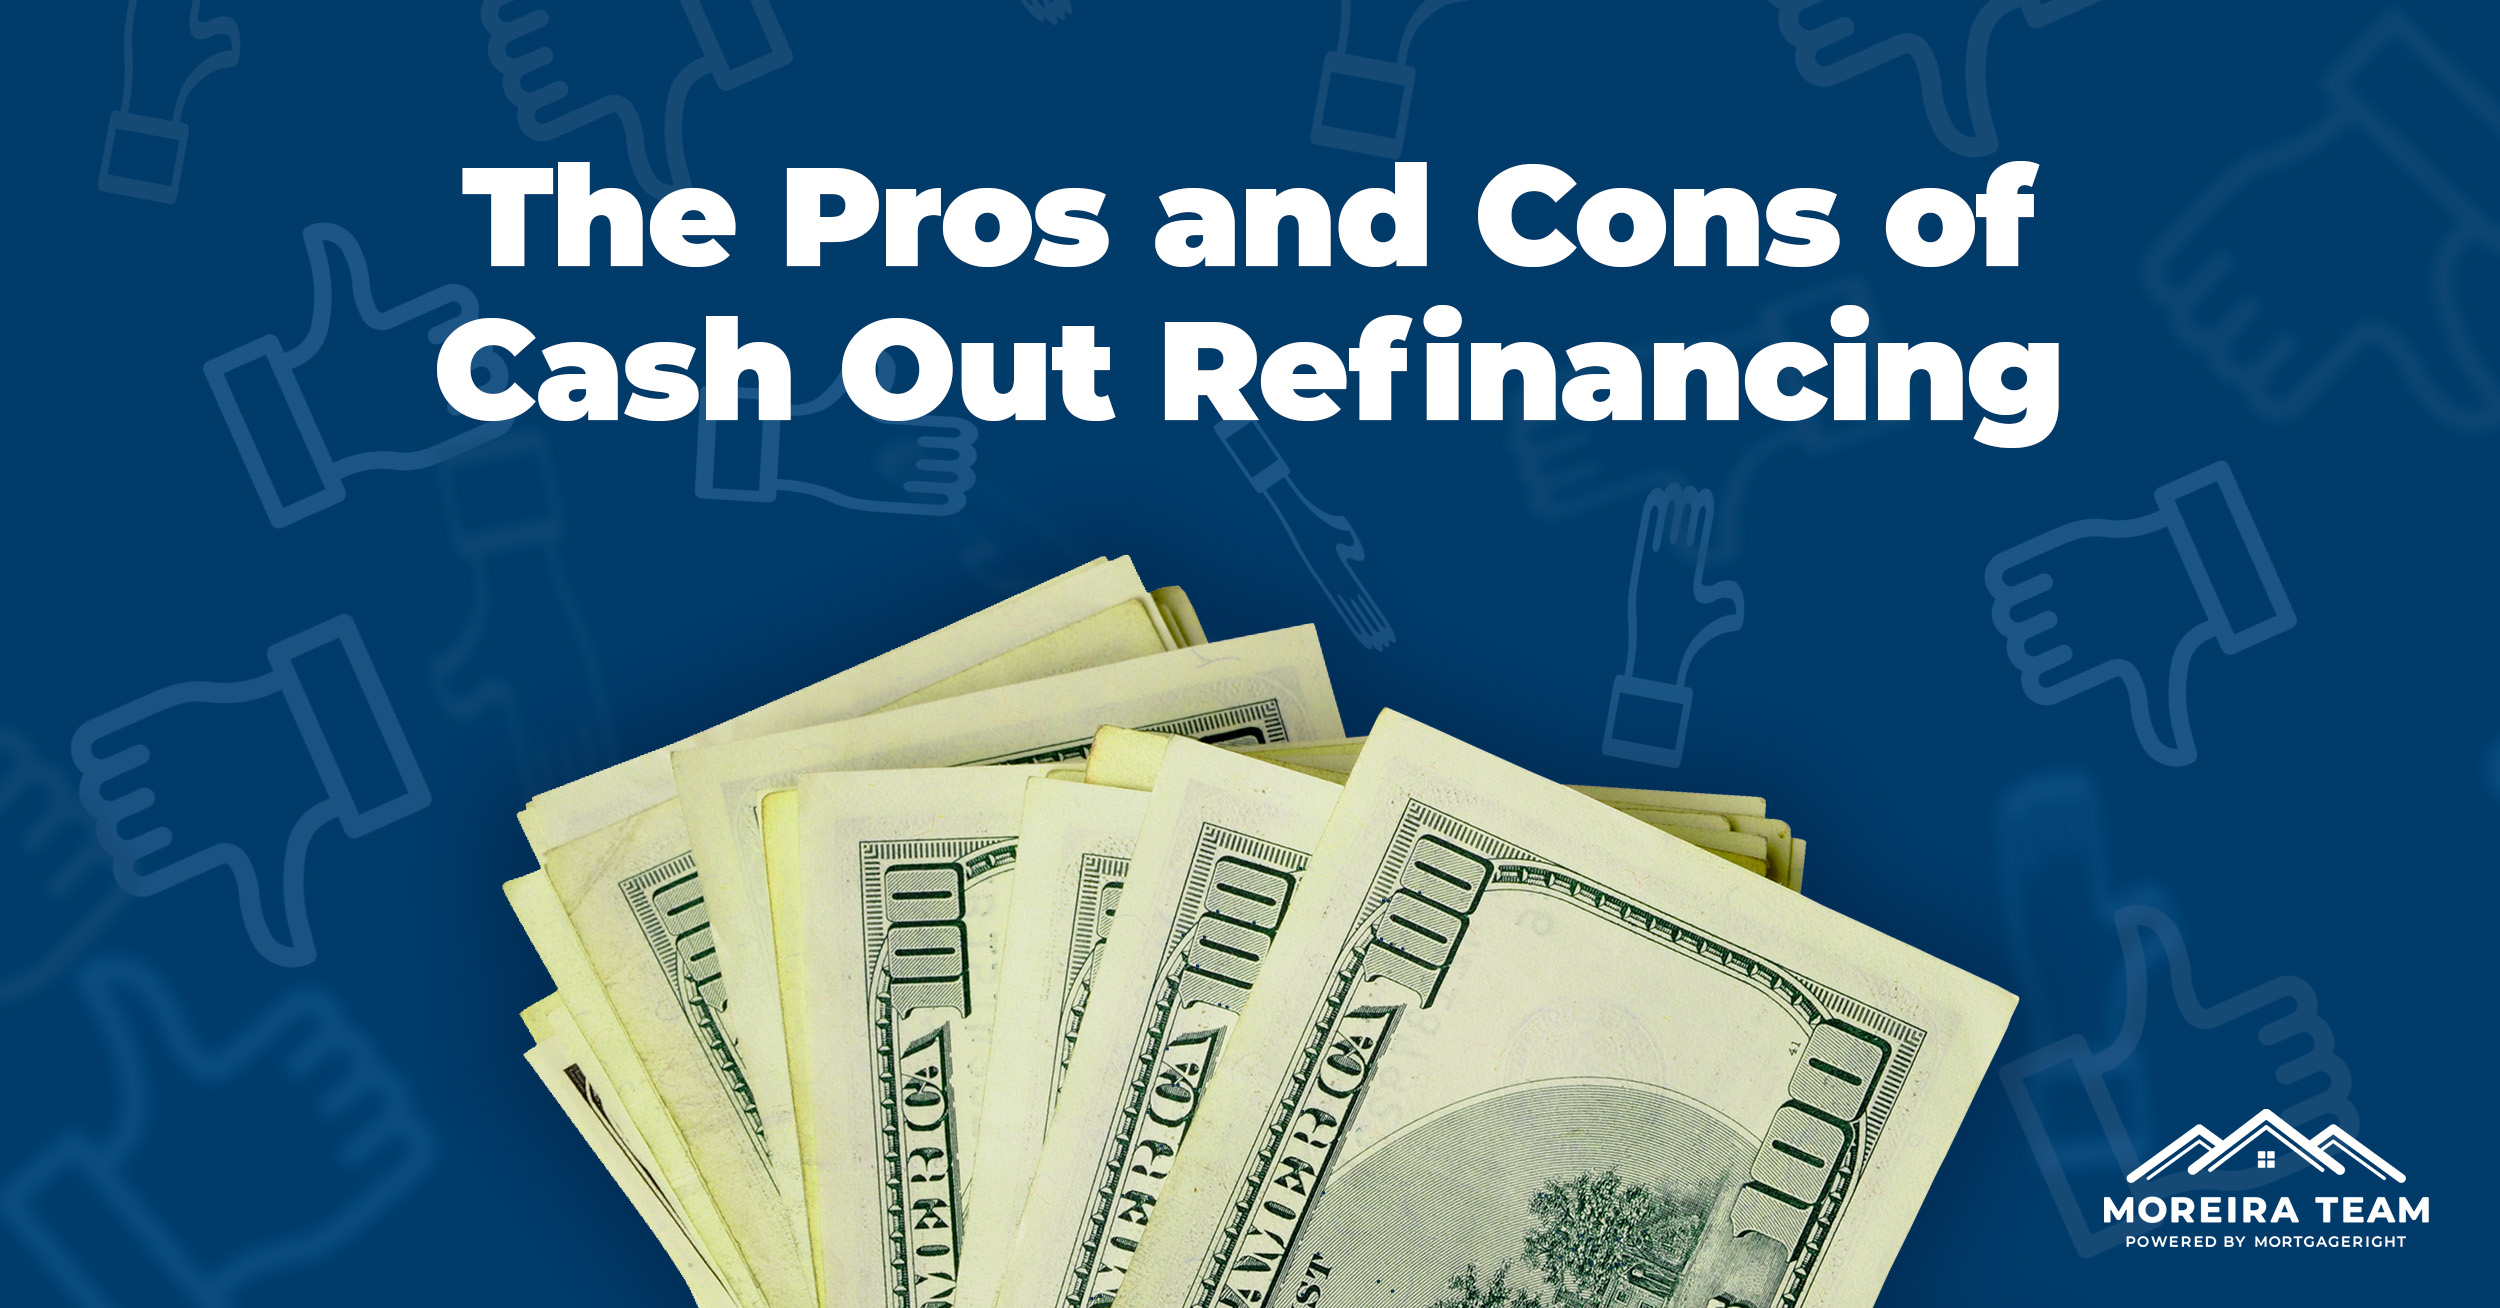 The pros and cons of cash out refinancing